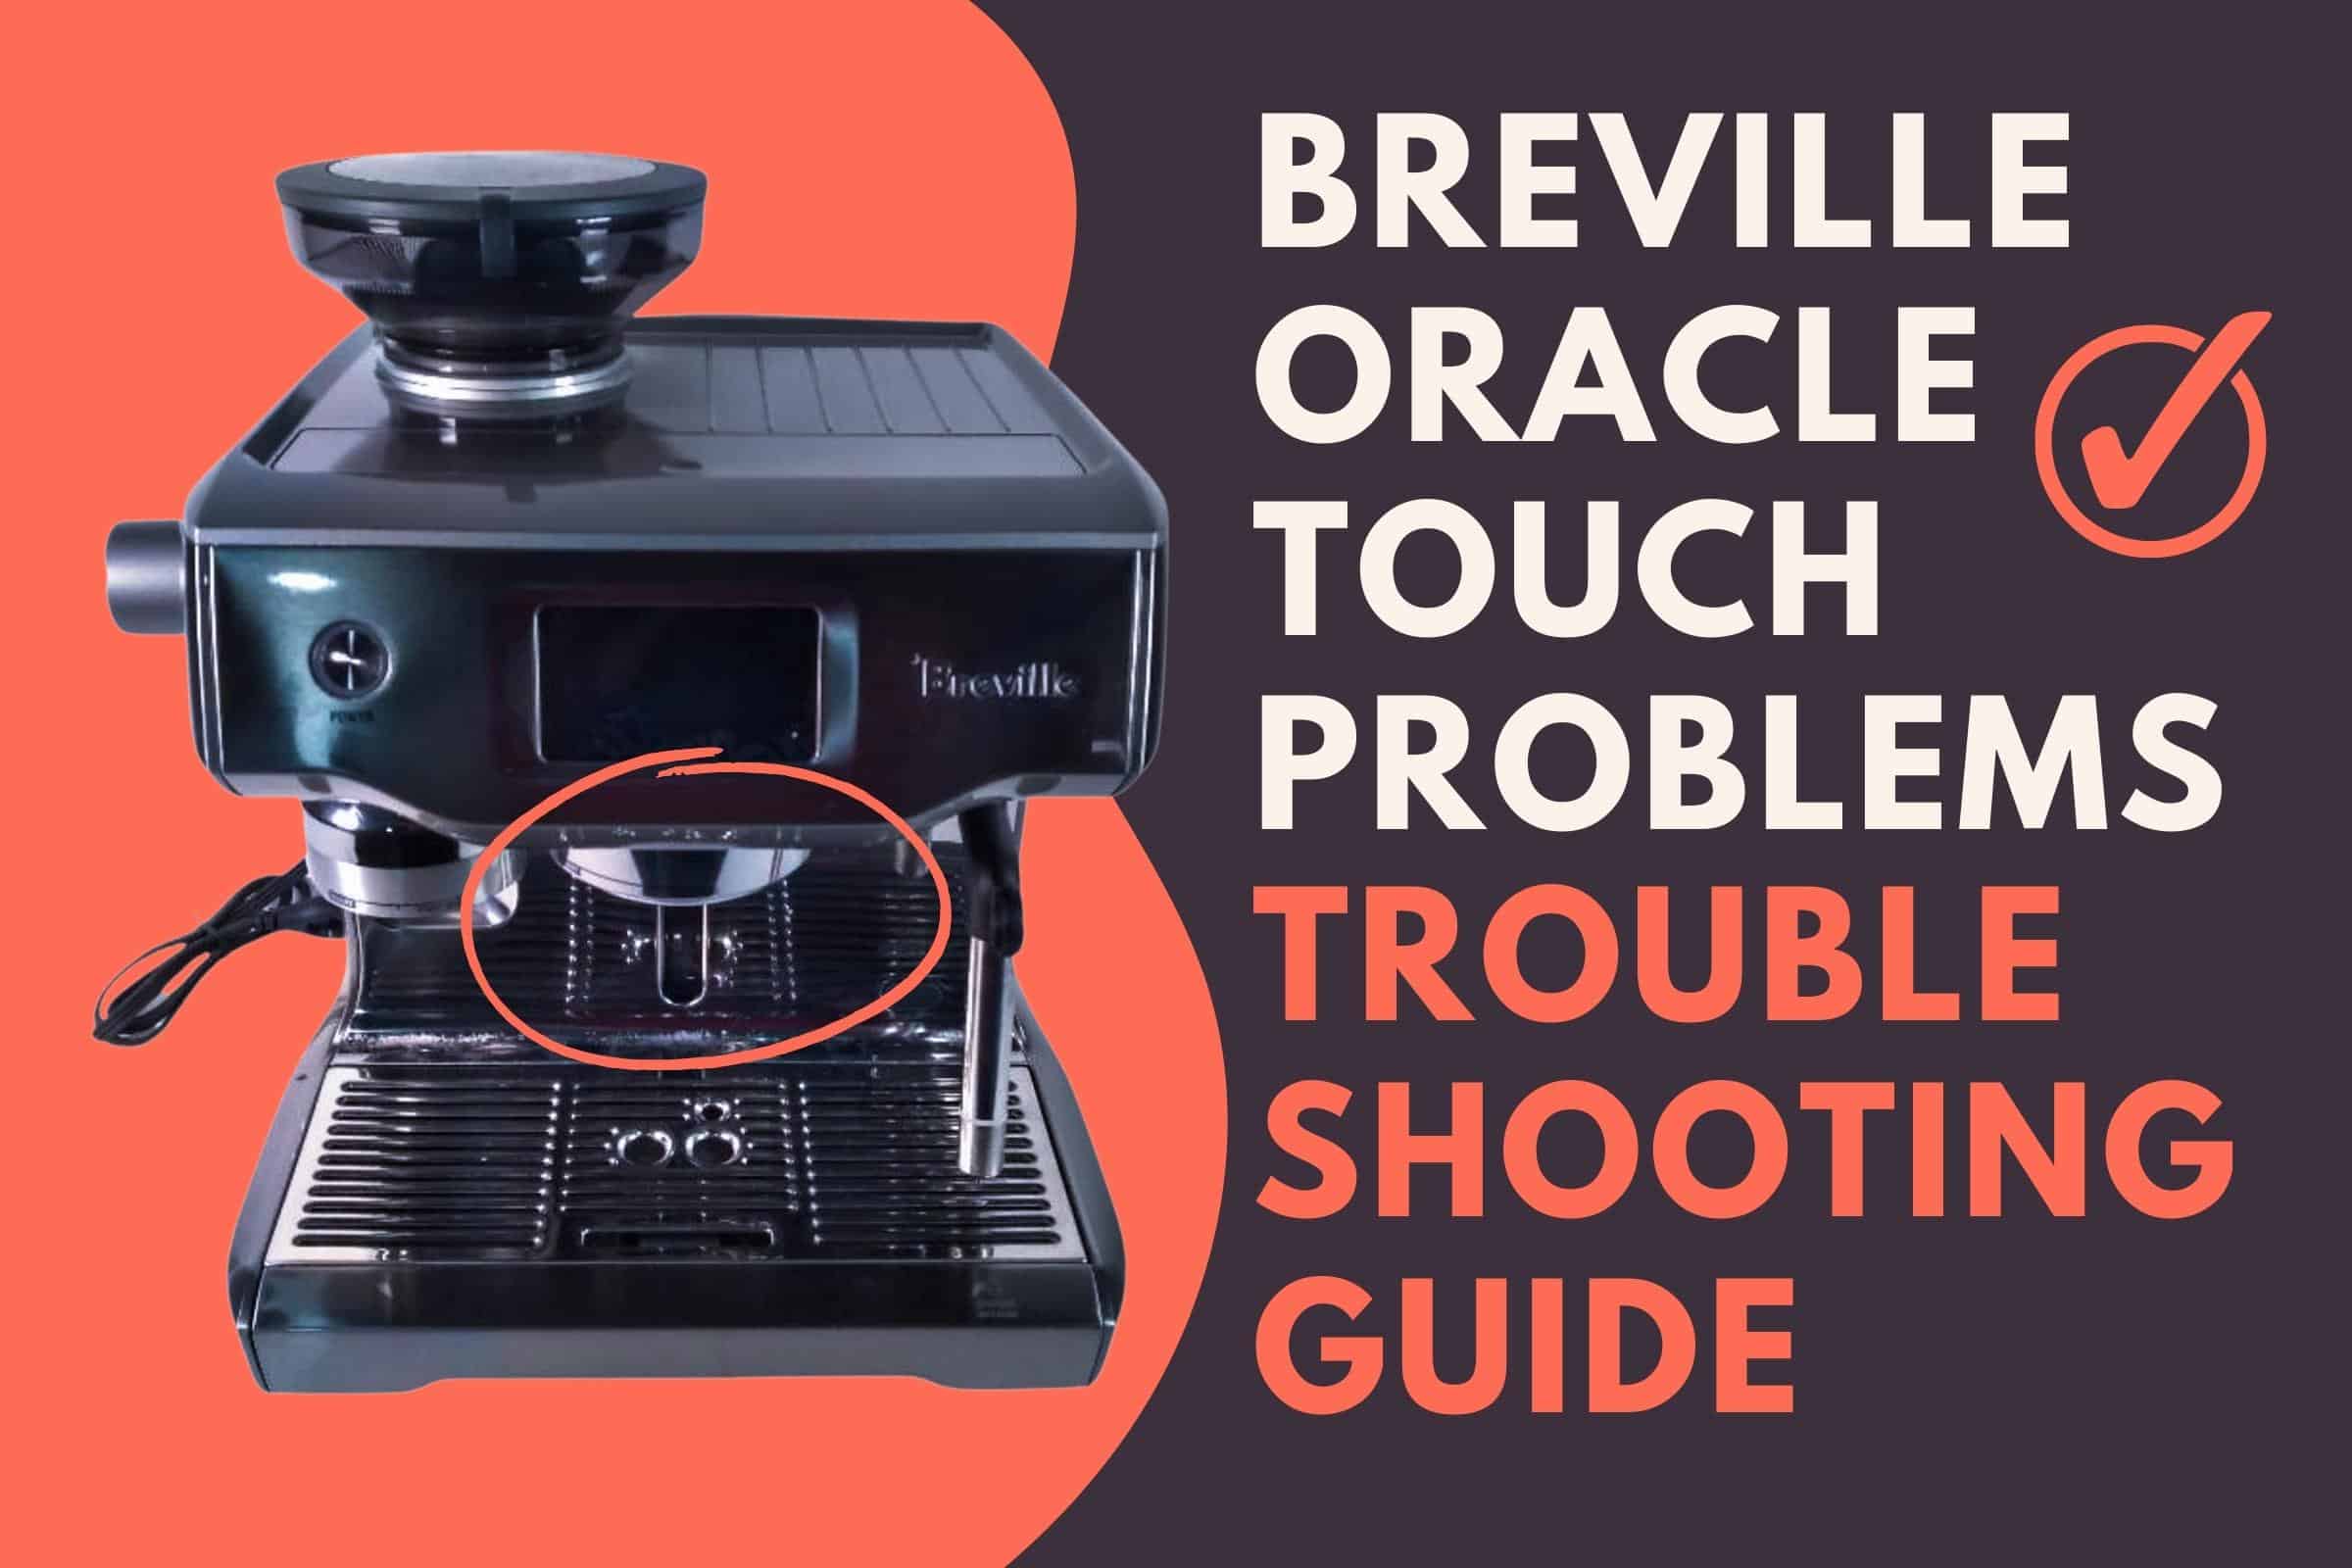 Breville Oracle Touch Problems